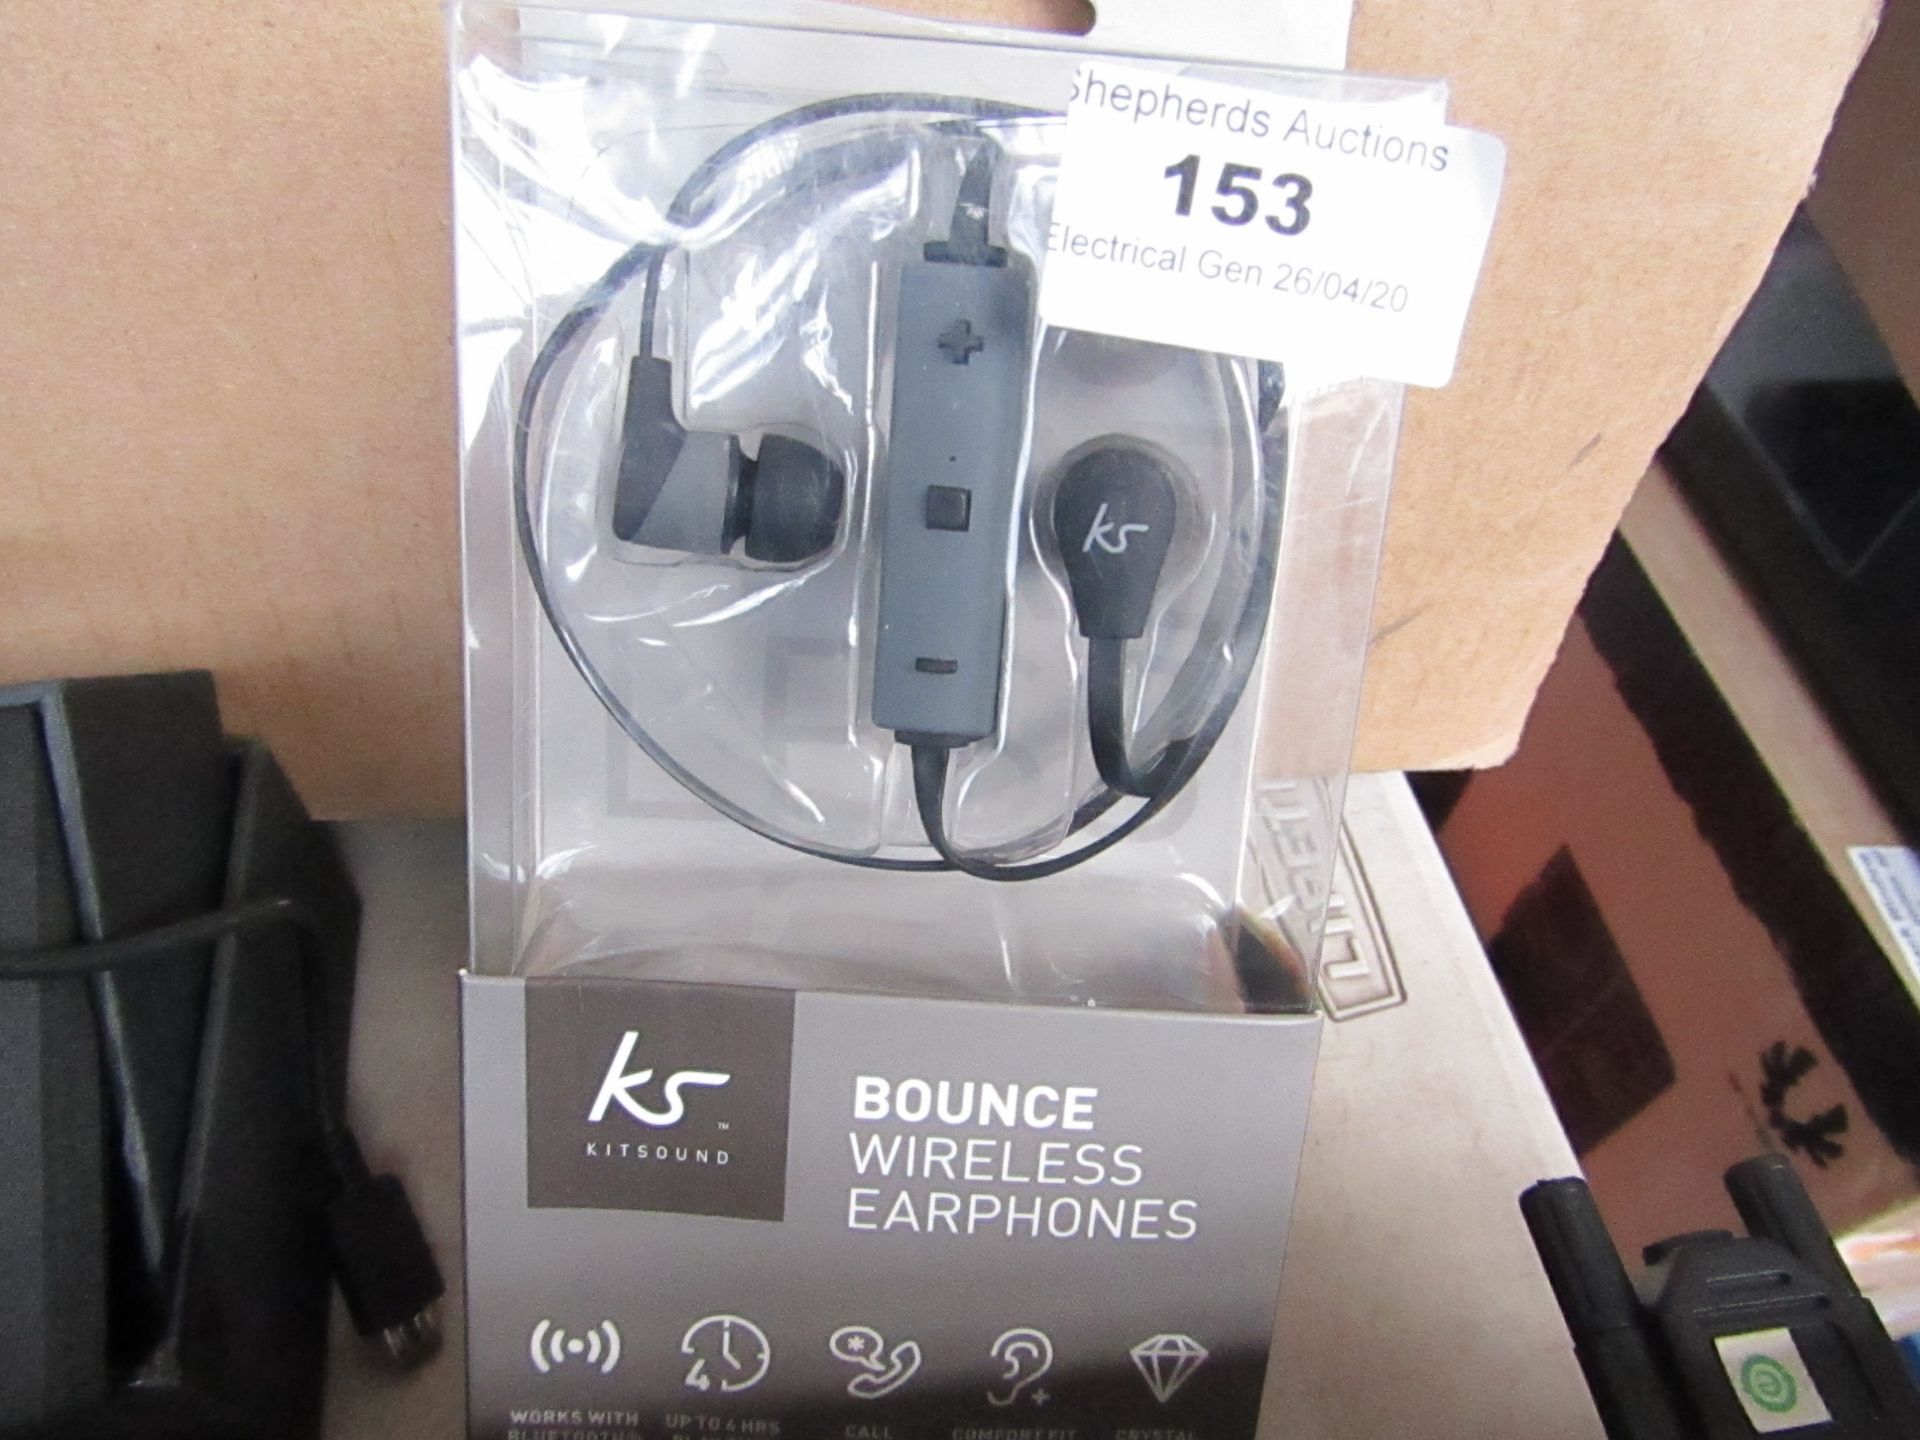 KitSound - Bounce Wireless Earphones - Good Condition, Untested & Packaged.